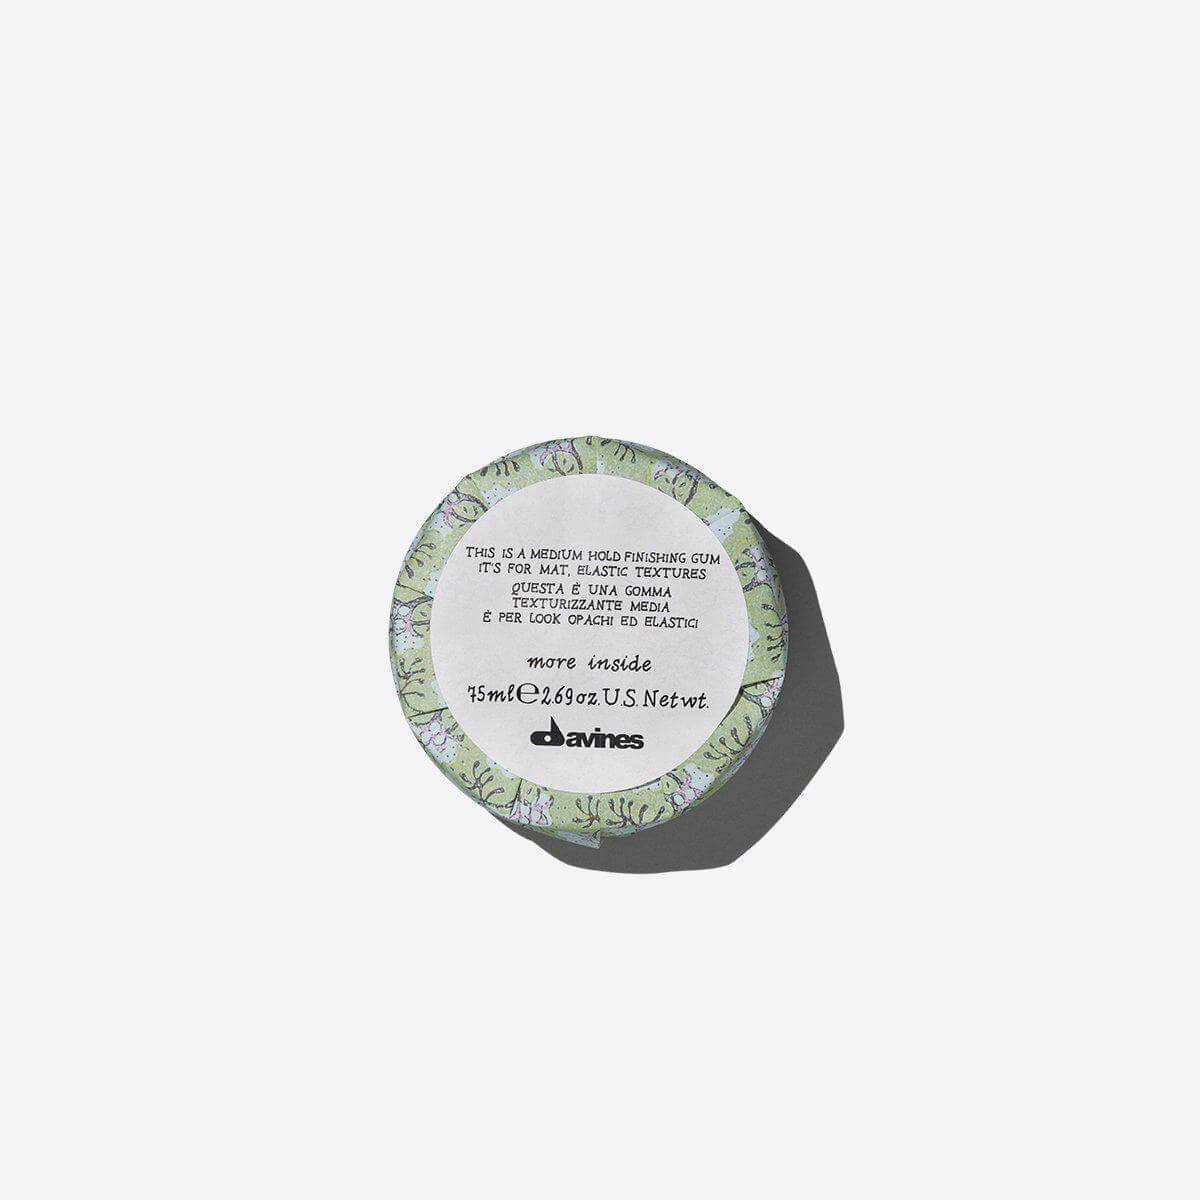 This is a Medium Hold Finishing Gum by Davines